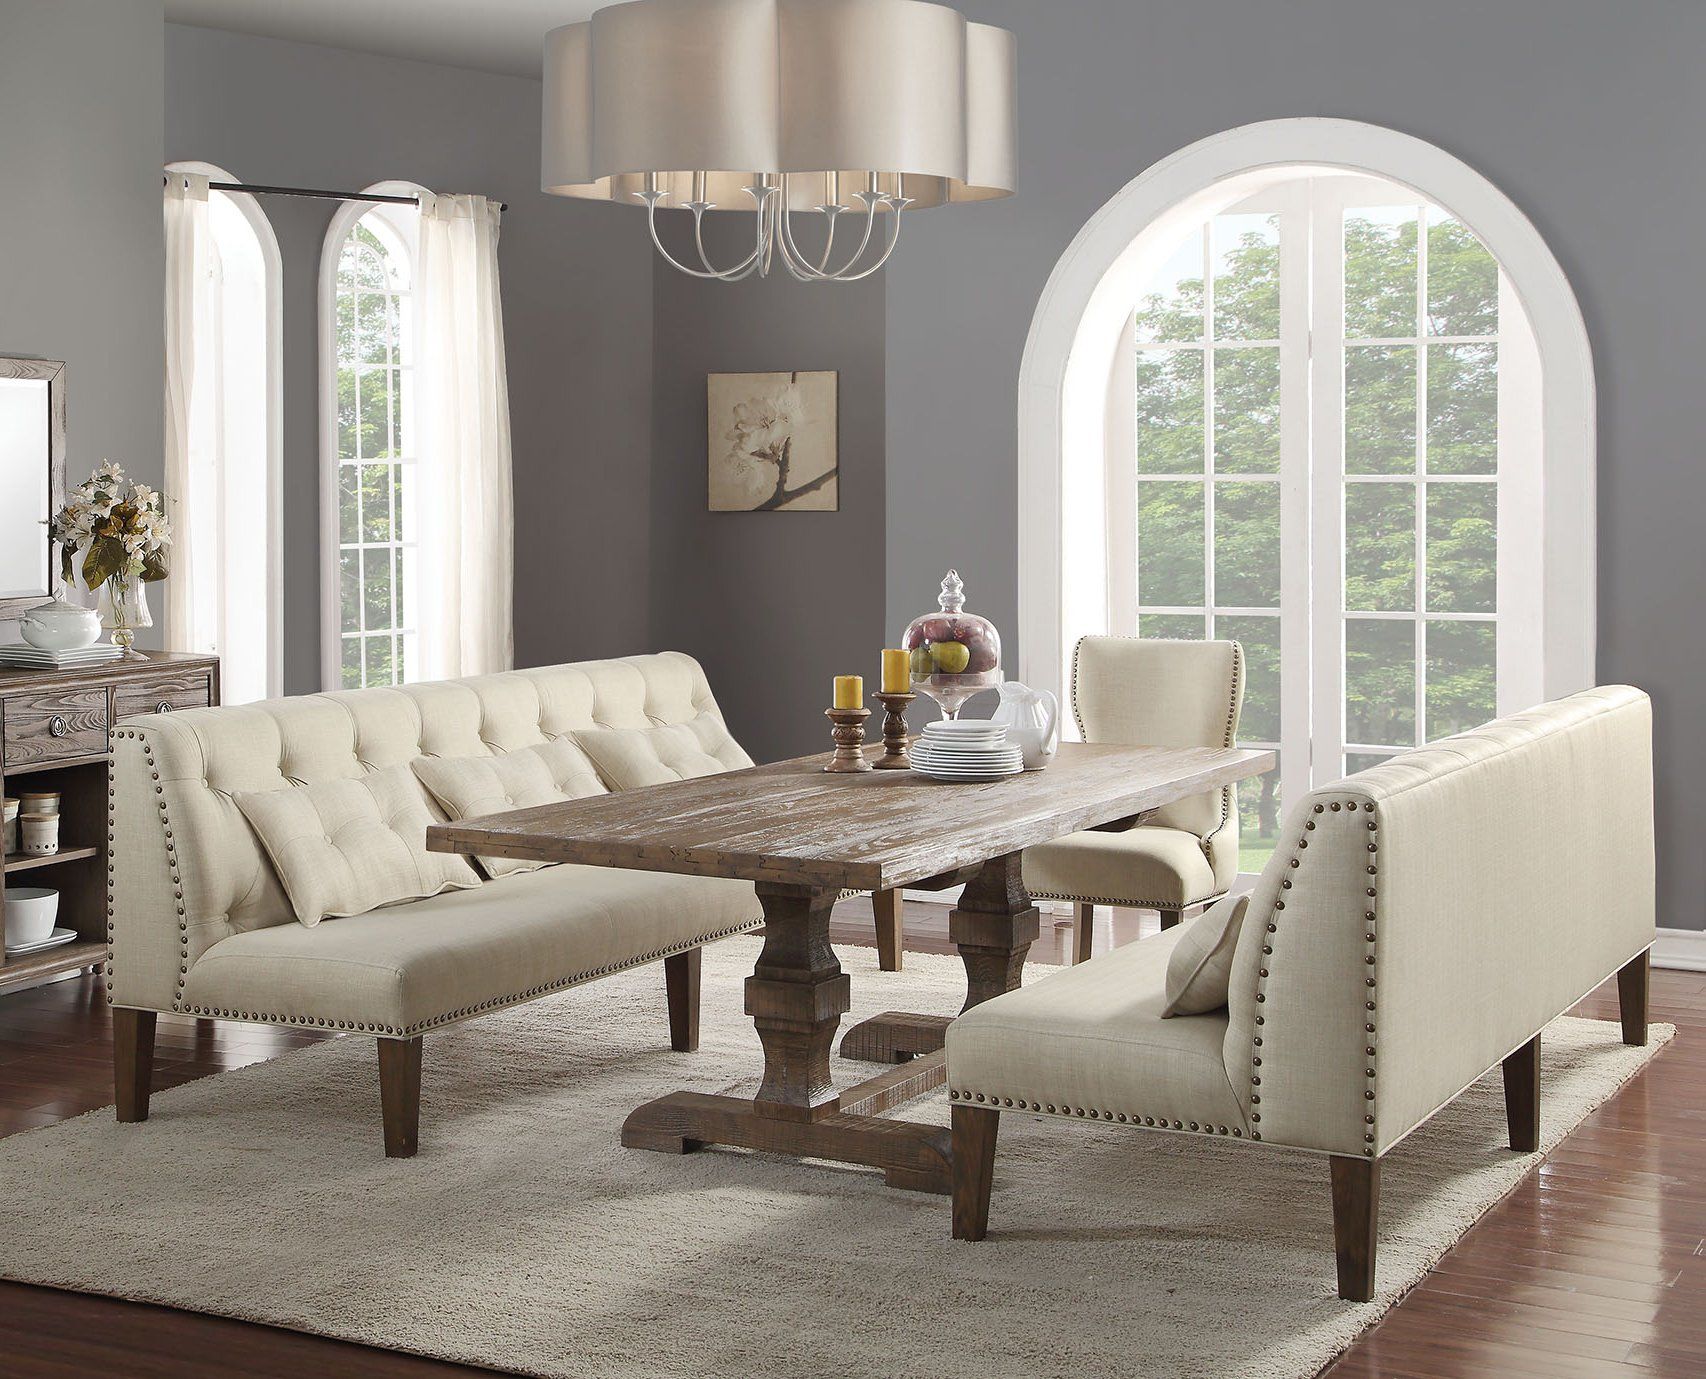 Banquette Haute Frais Our Inverness Dining Collection Will Bring You Back to 8th